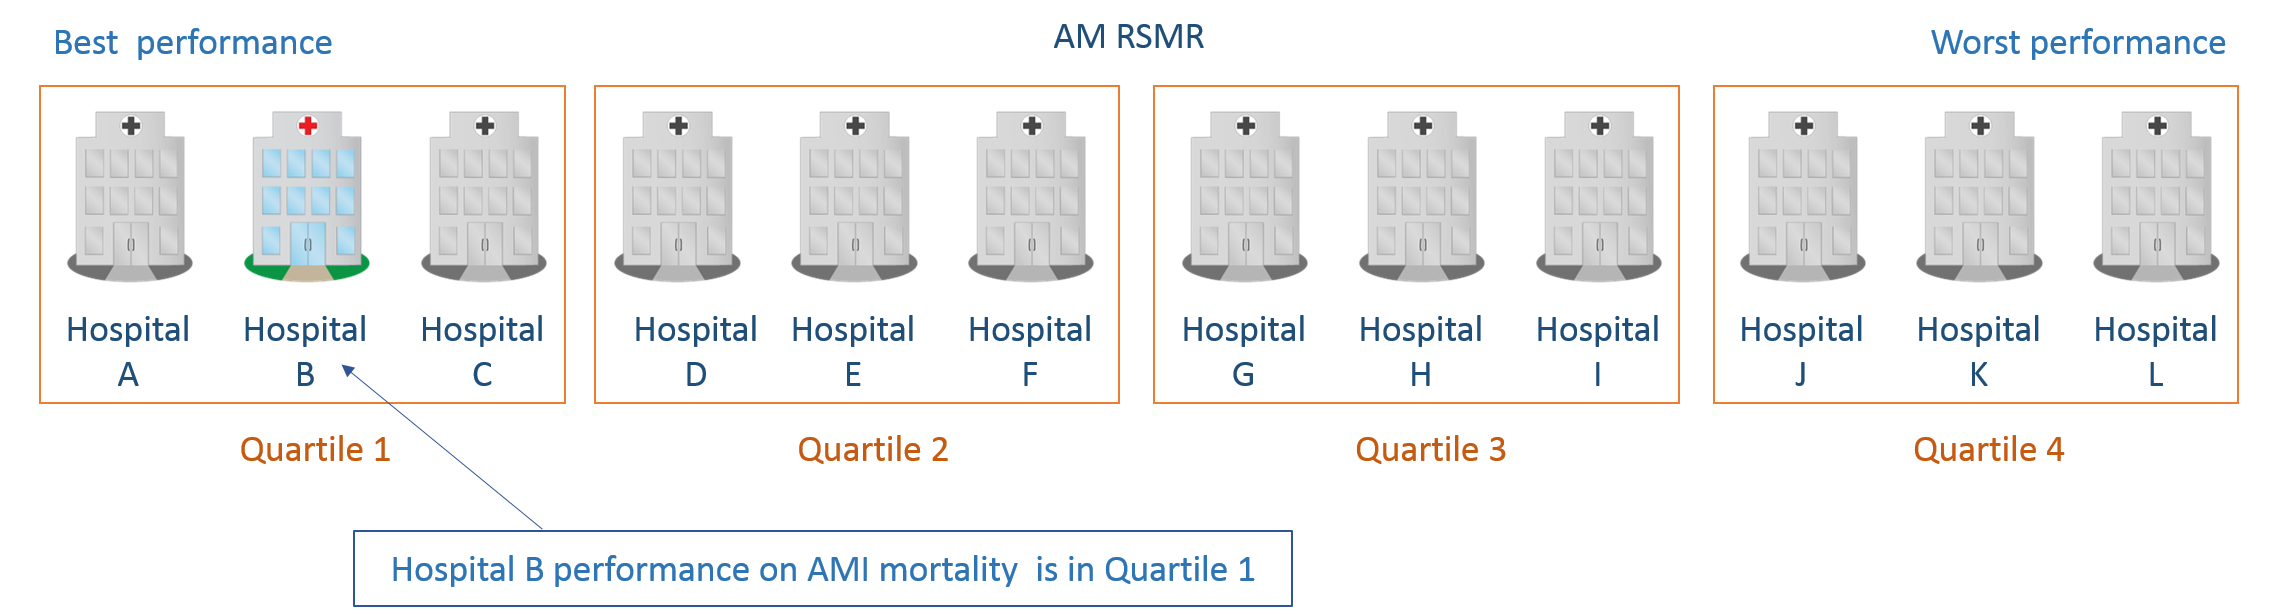 The hospitals are divided into groups based on their ranking